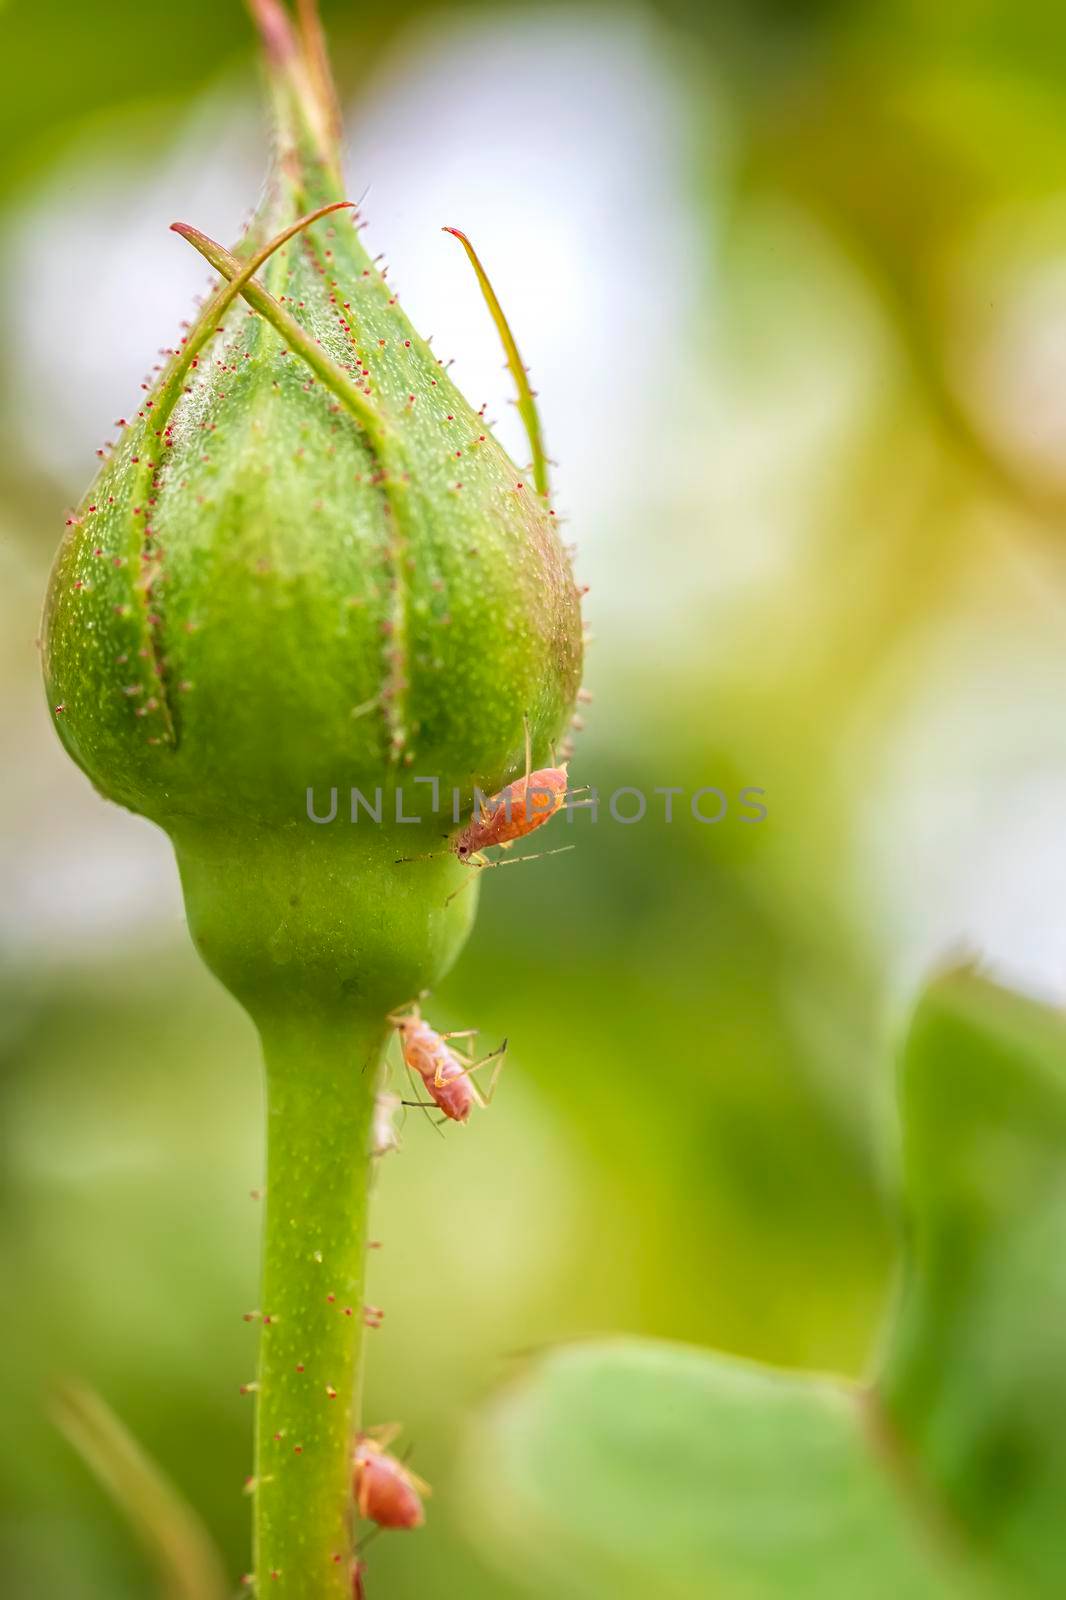 Aphids on a rose bud in nature. Close up. Vertical view by EdVal